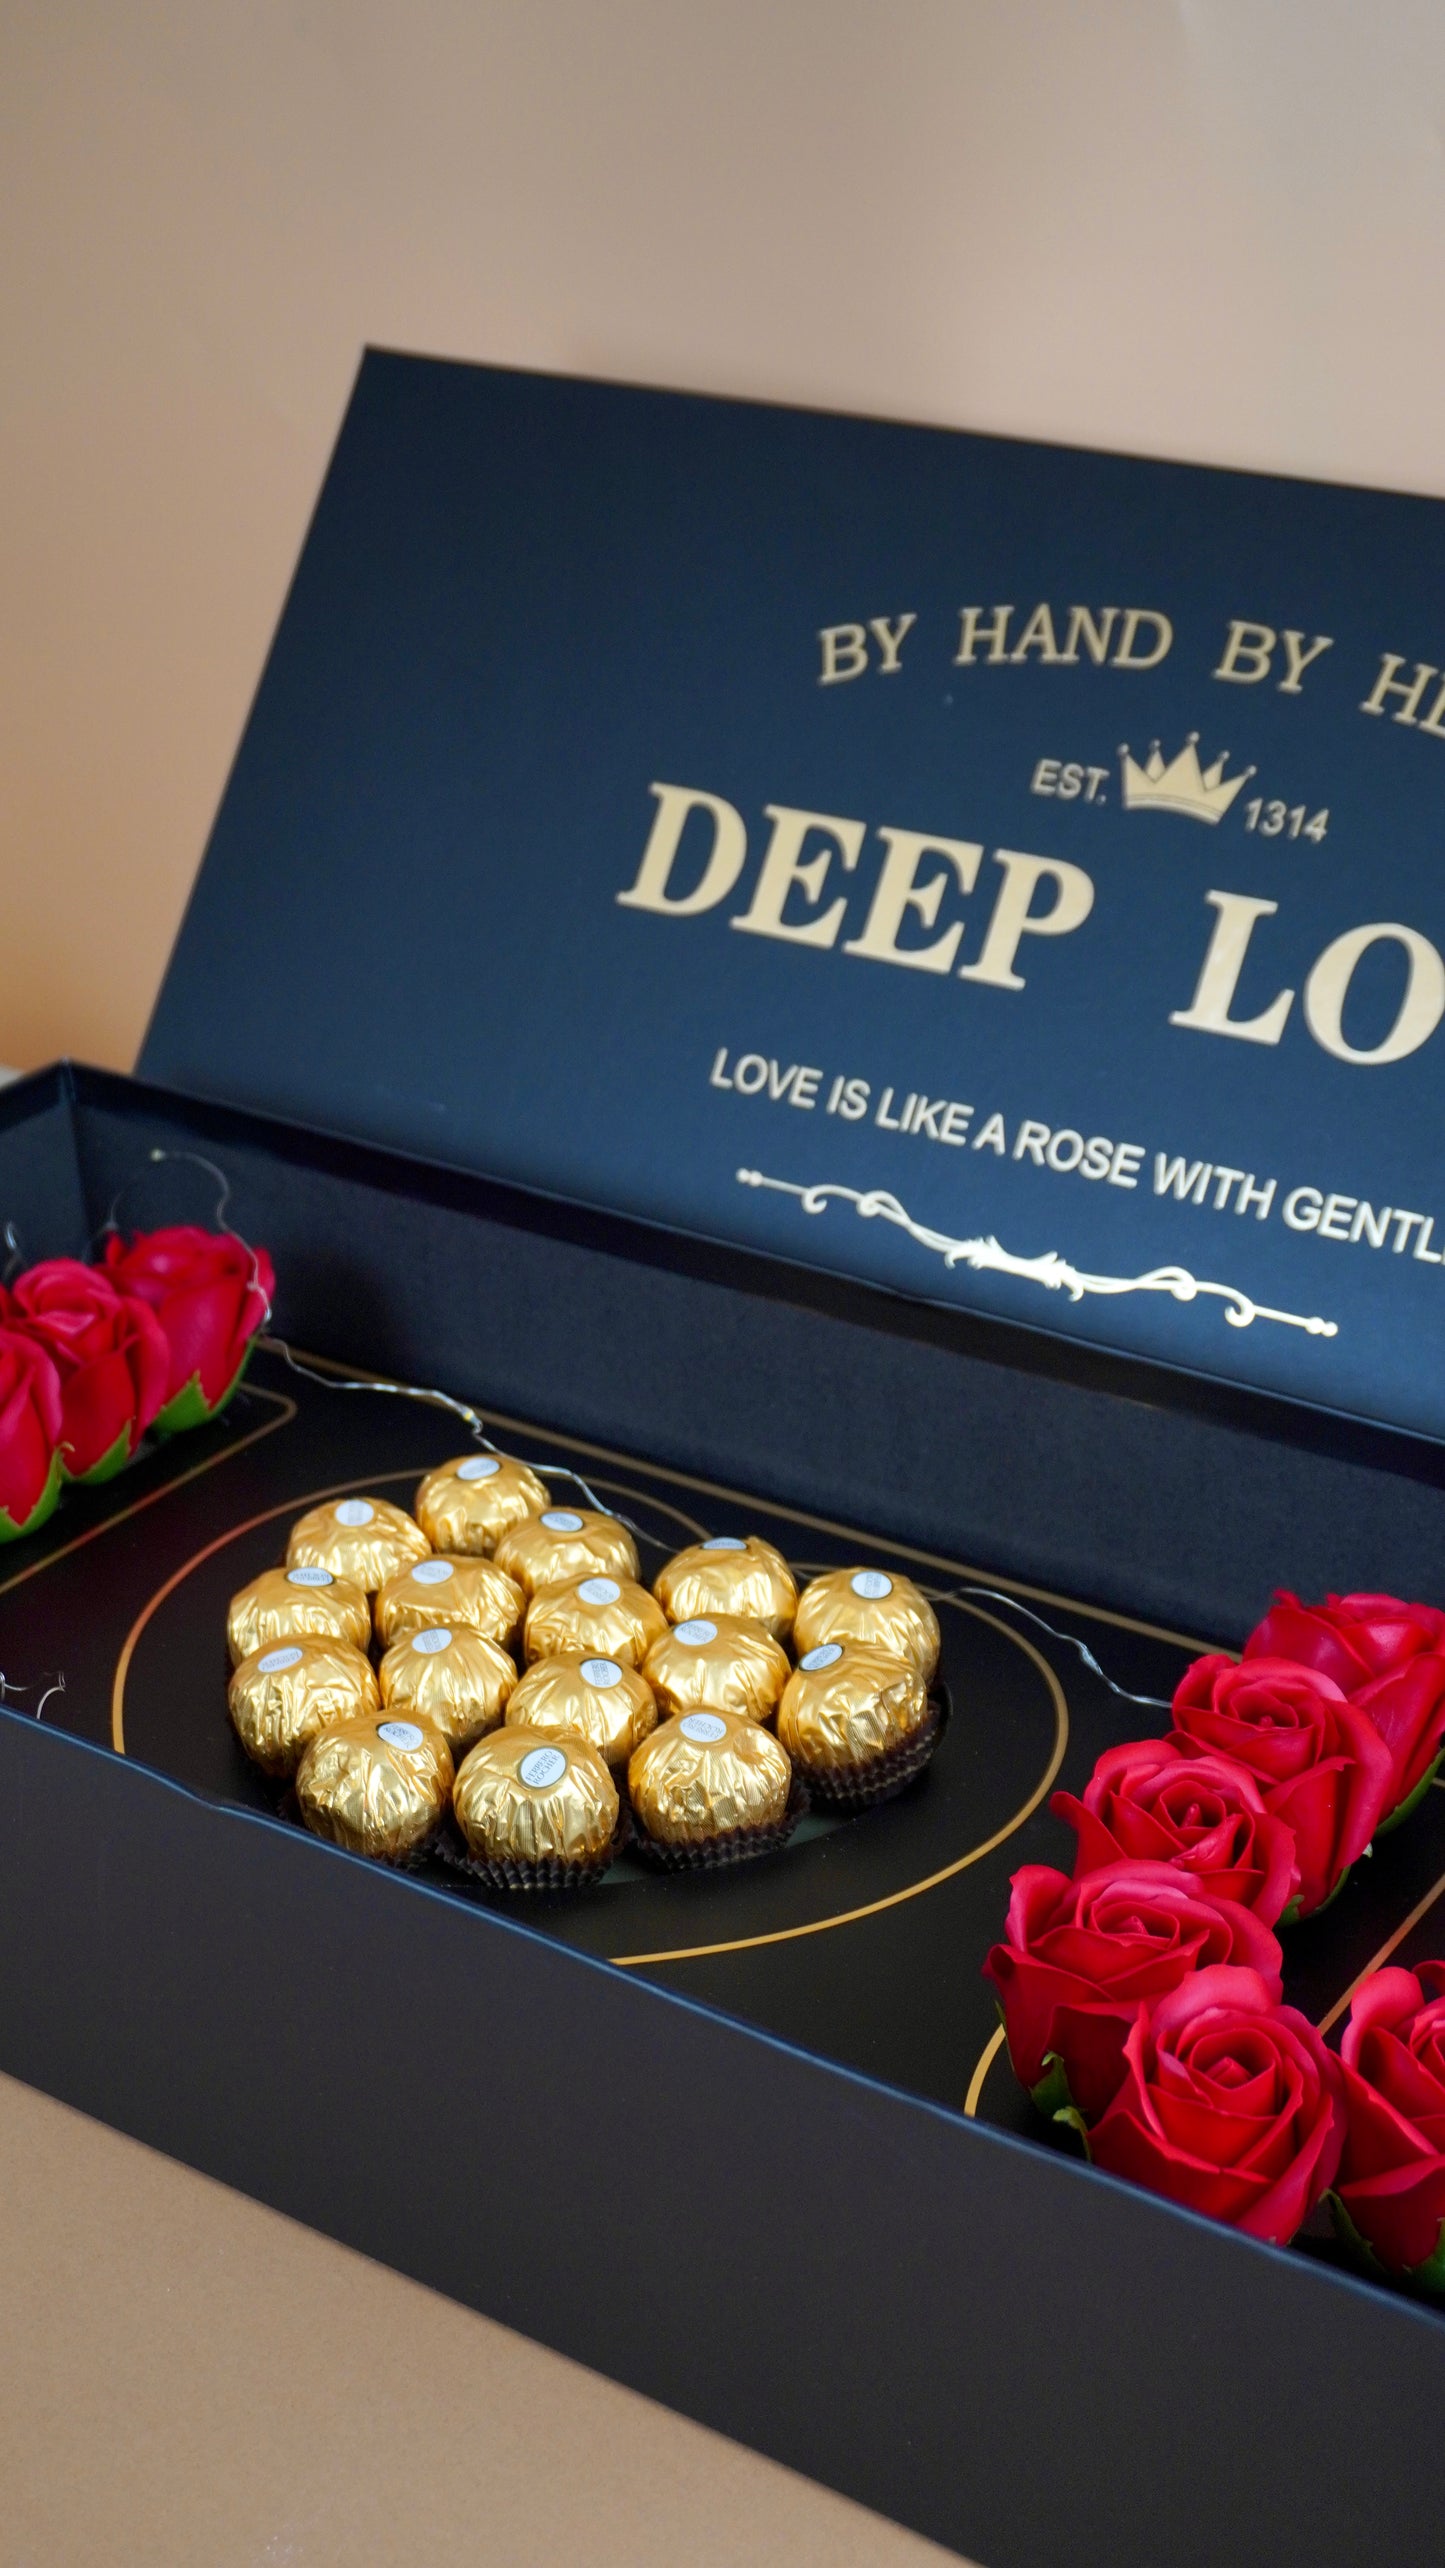 Deep Love Box(With Soap Roses) - Available in Klang Valley